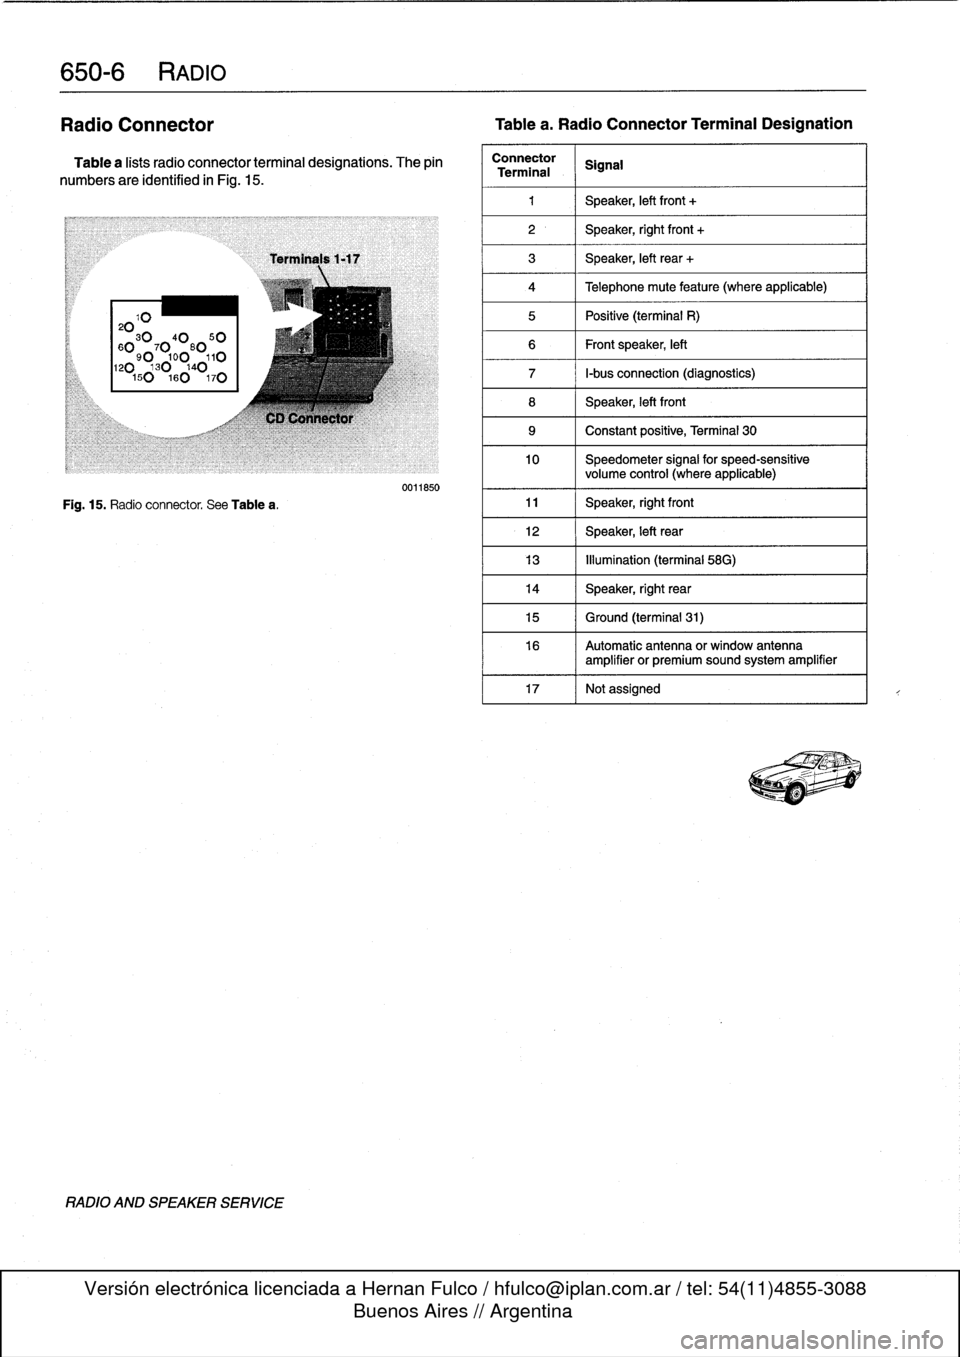 BMW 325i 1997 E36 Workshop Manual 
650-
6
RADIO

Radio
Connector

	

Tablea
.
Radio
Connector
Terminal
Designation

Table
a
lists
radio
connector
terminal
designations
.
The
pin

numbers
are
identified
in
Fig
.
15
.

20103040
50

60
9